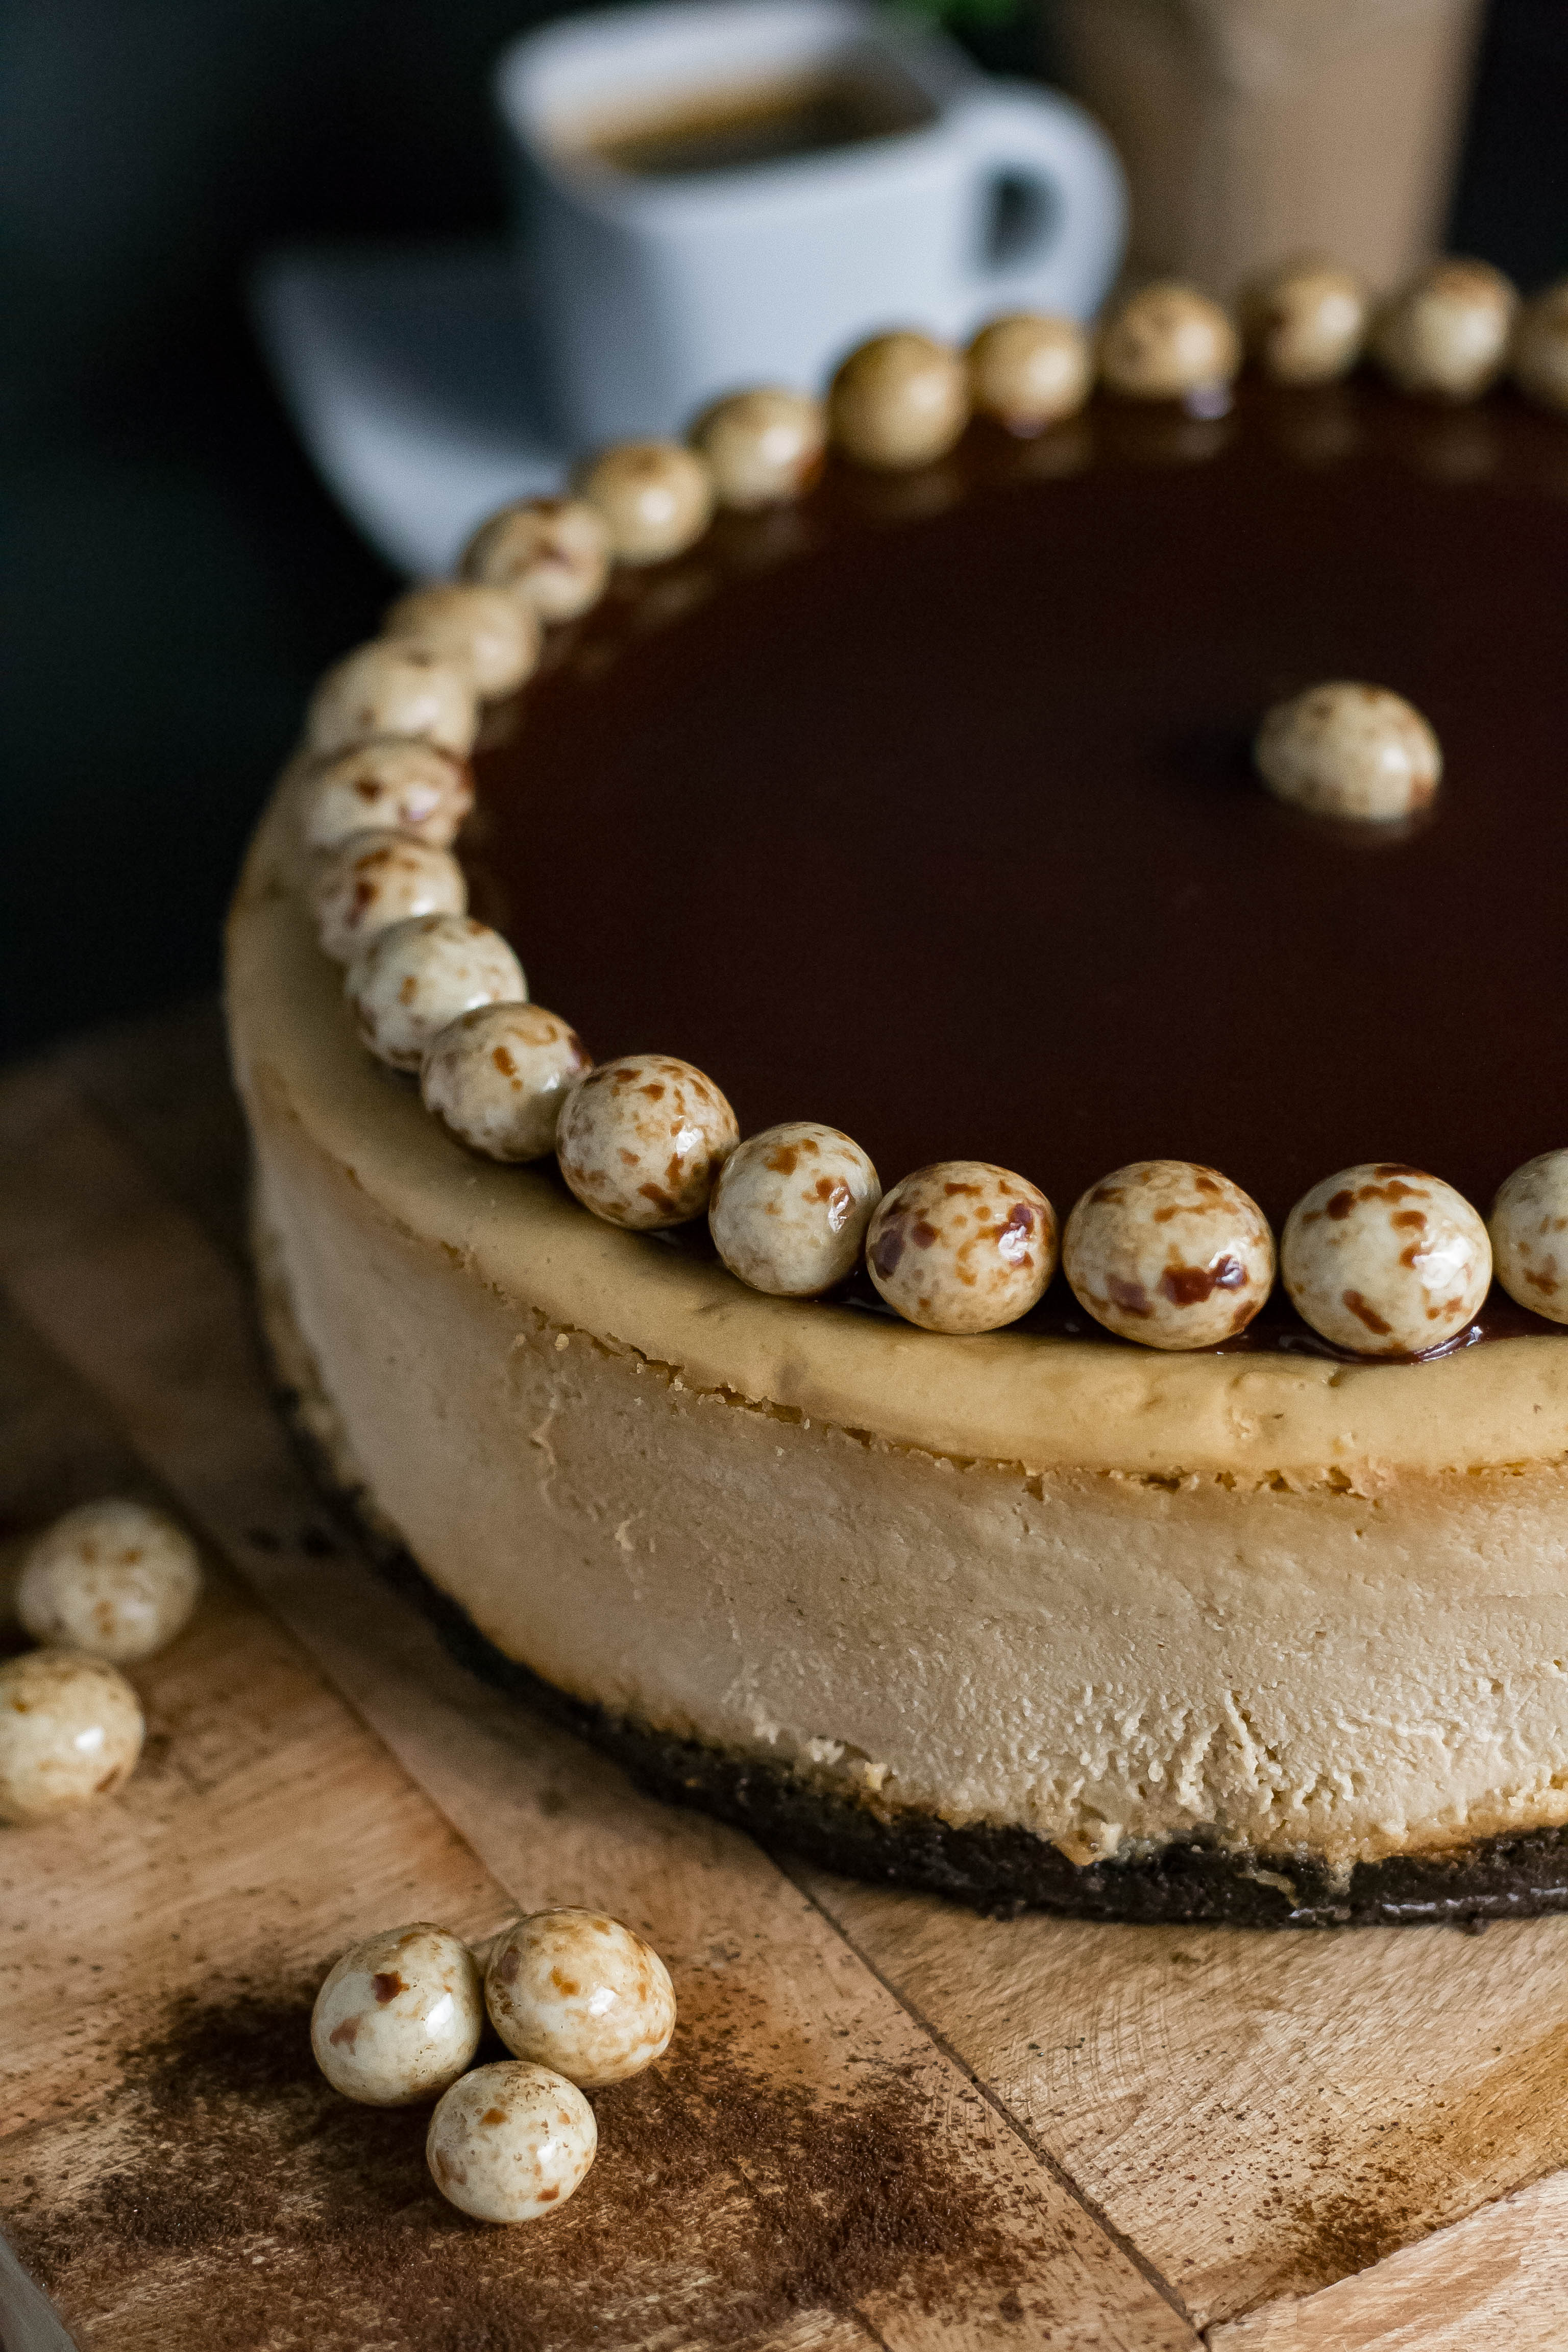 Espresso Cheesecake with Chocolate Glaze - What the Forks for Dinner?